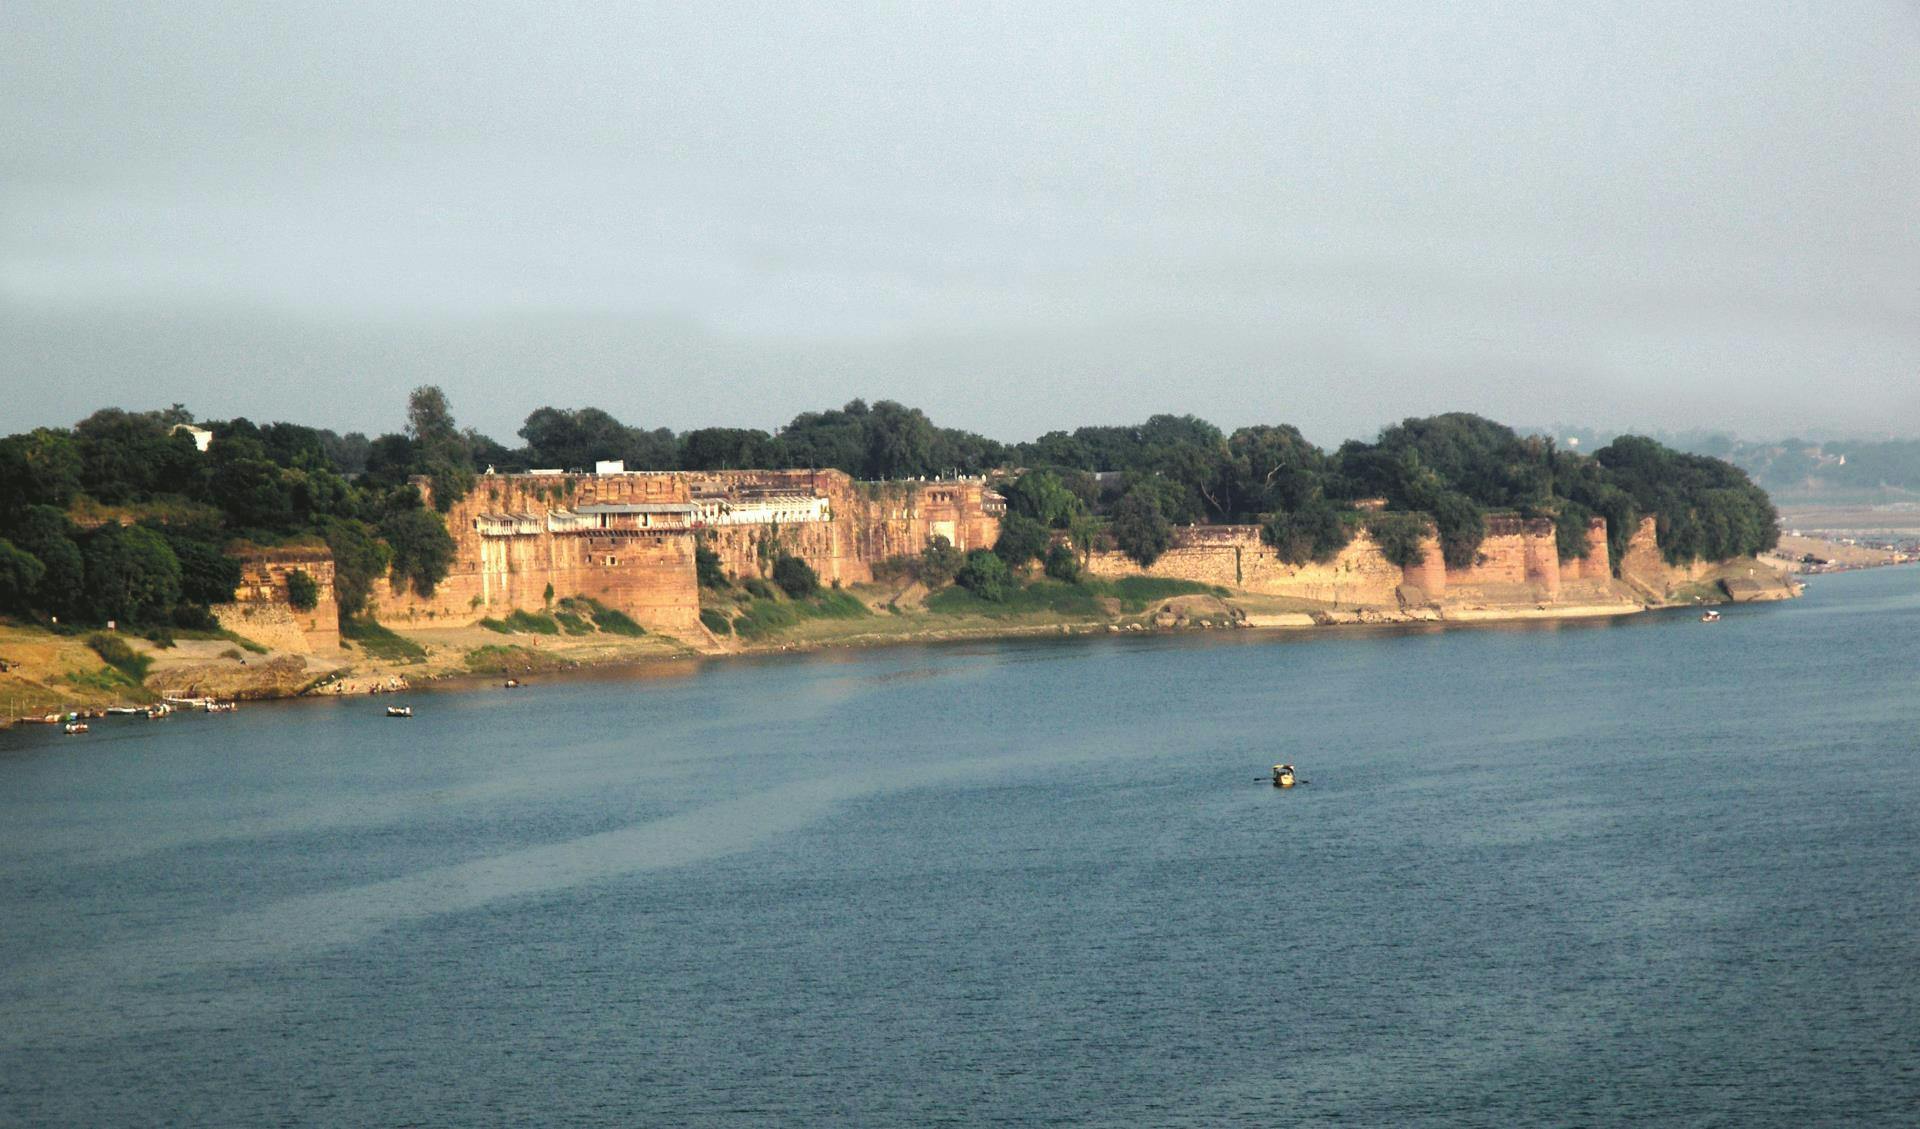 Recent photograph of the Fort of Allahabad